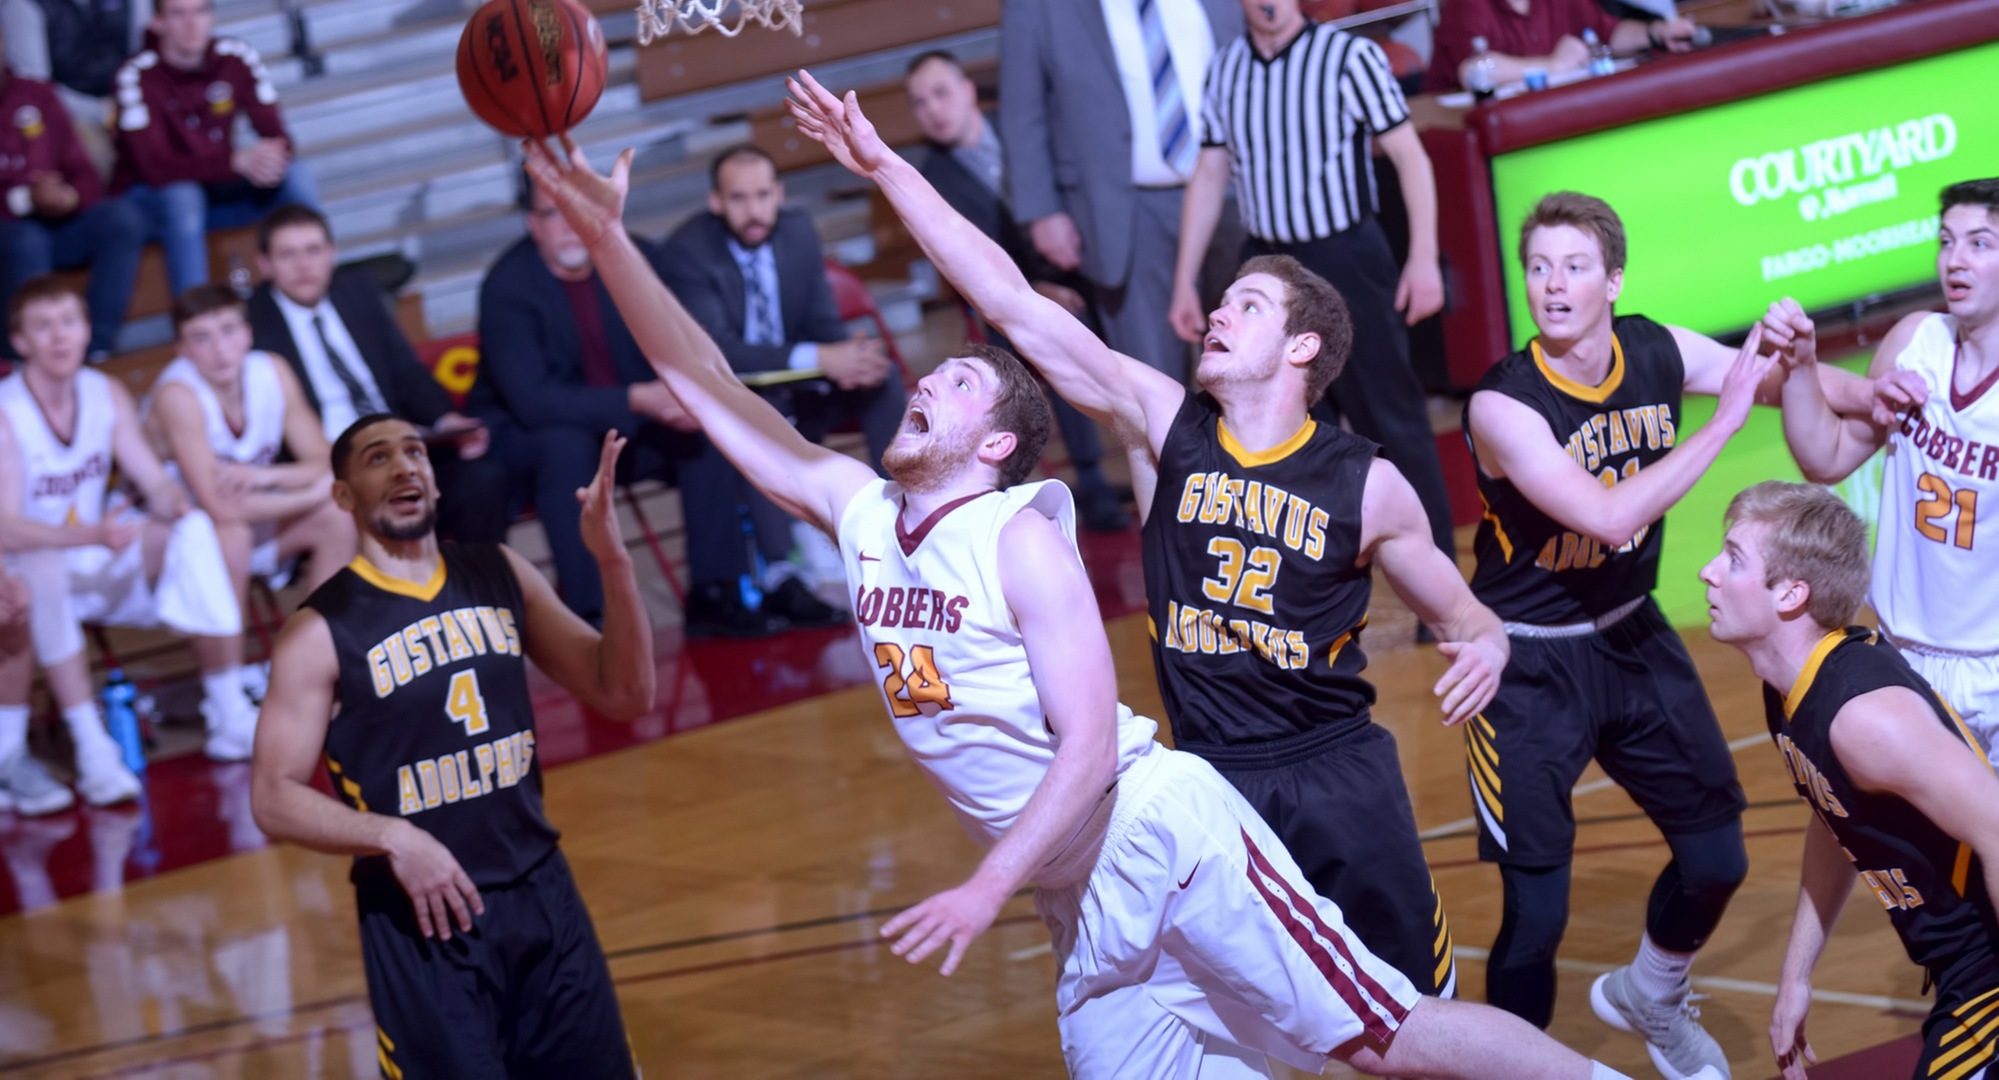 Mason Carpenter drives to the basket during the Cobbers' game with Gustavus. He finished with 10 points and was 4-for-4 from the free throw line.